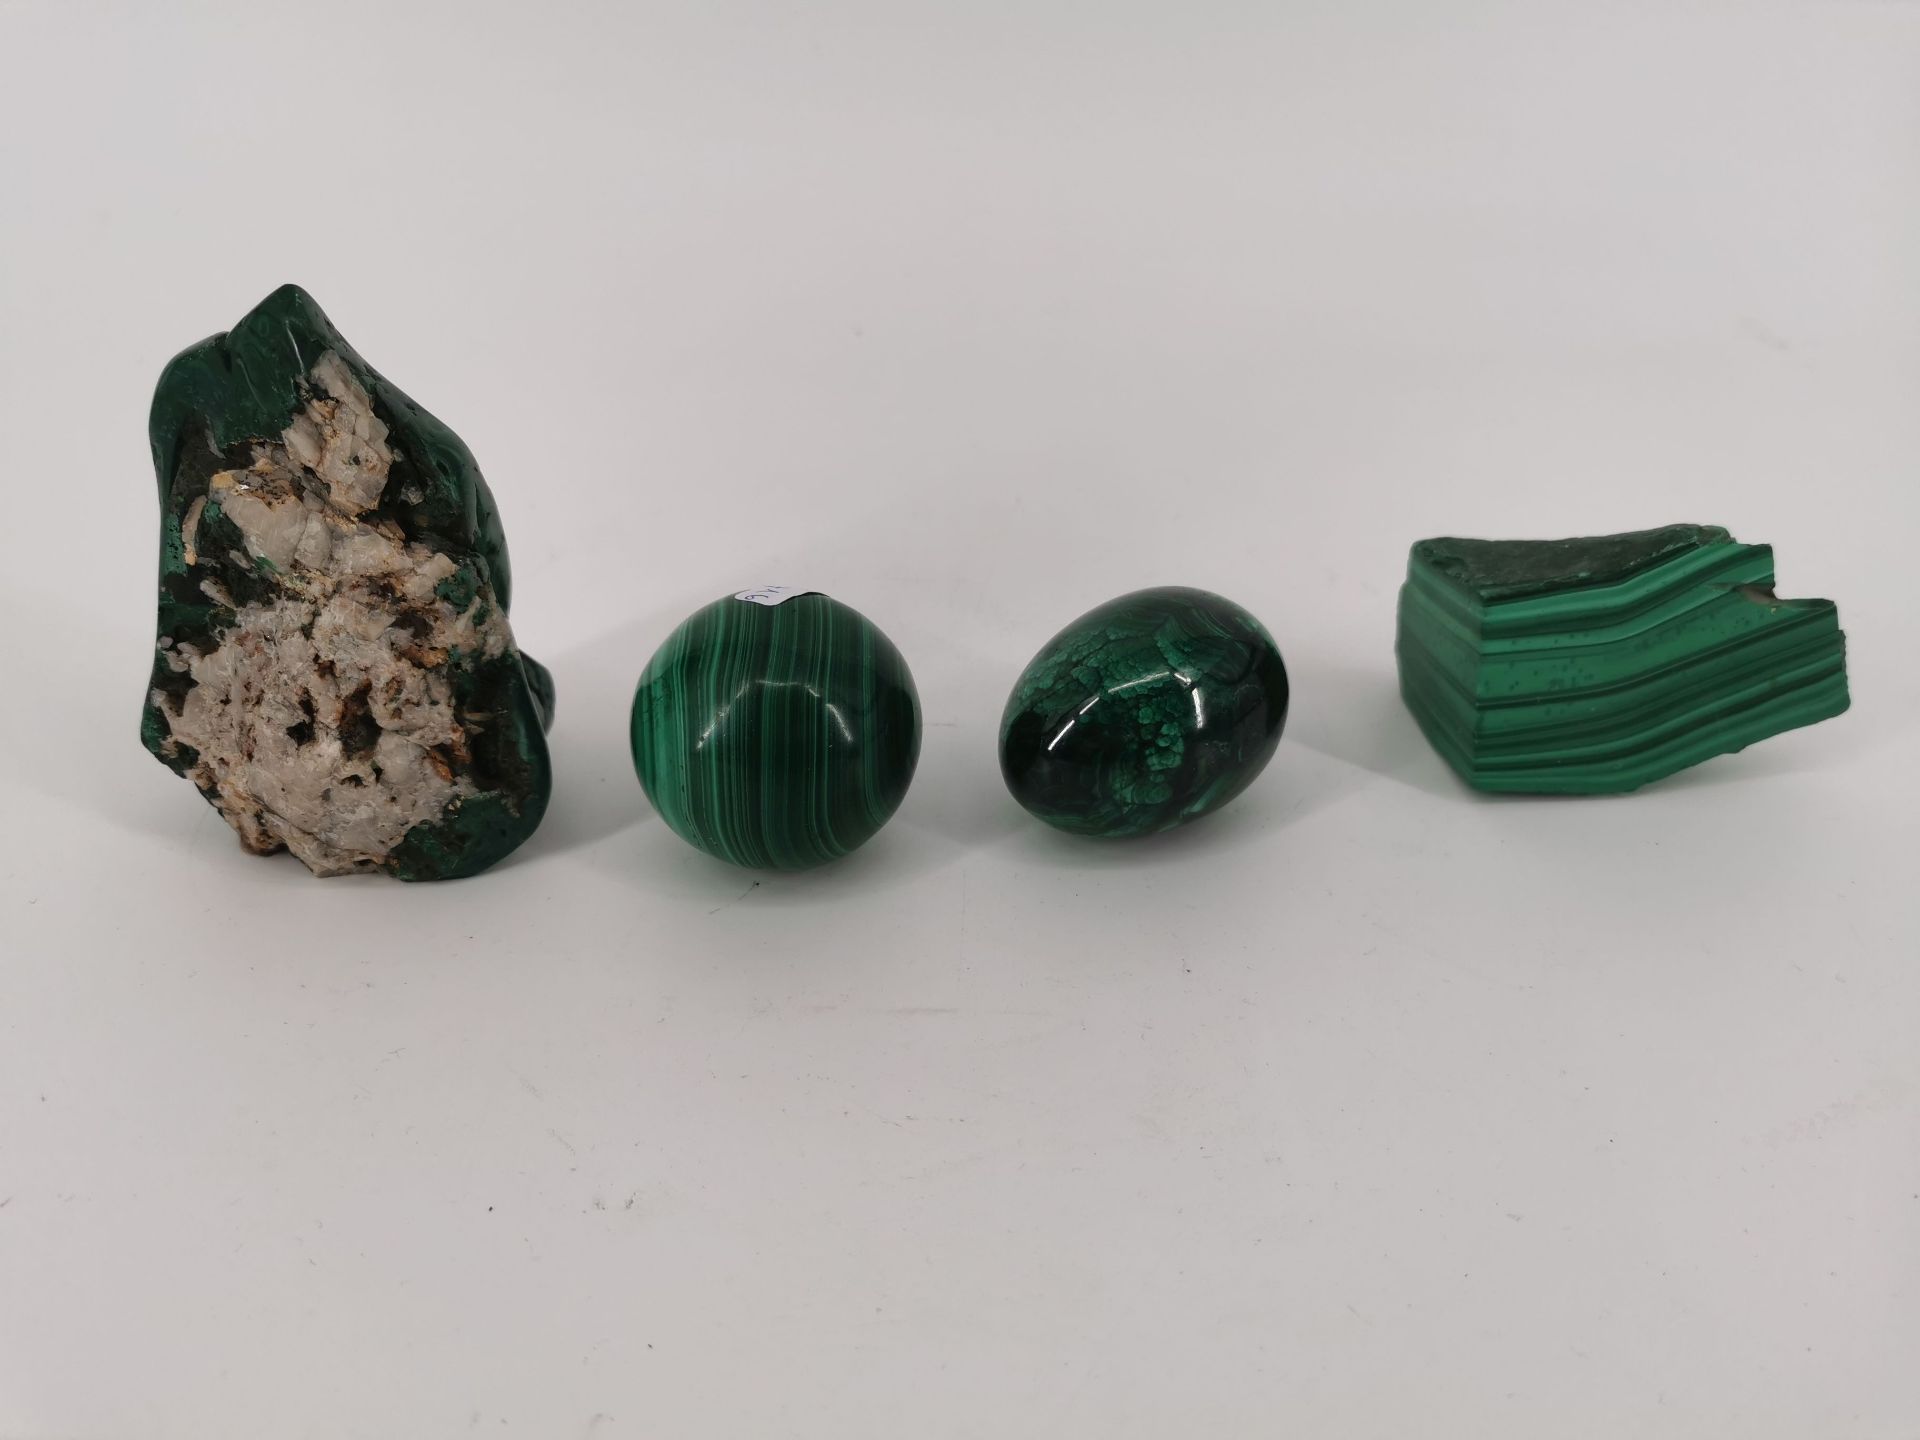 MIXED LOT OF CARVED FIGURES / STONE OBJECTS MADE OF MALACHITE - Image 3 of 3